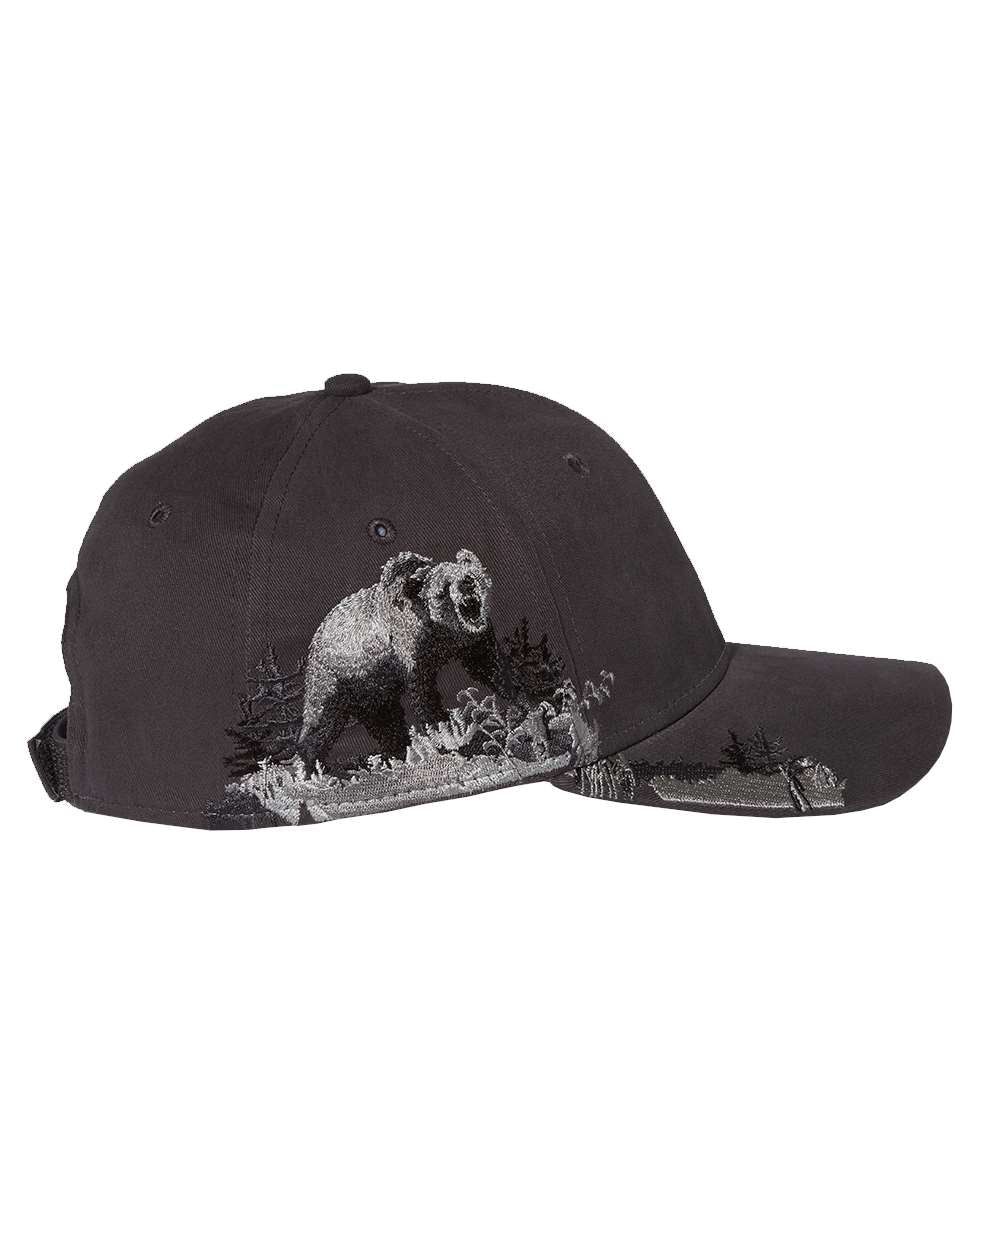  Image of the Grizzly Bear Cap, showcasing its embroidered grizzly bear design, perfect for adding rugged charm to your outdoor adventures.